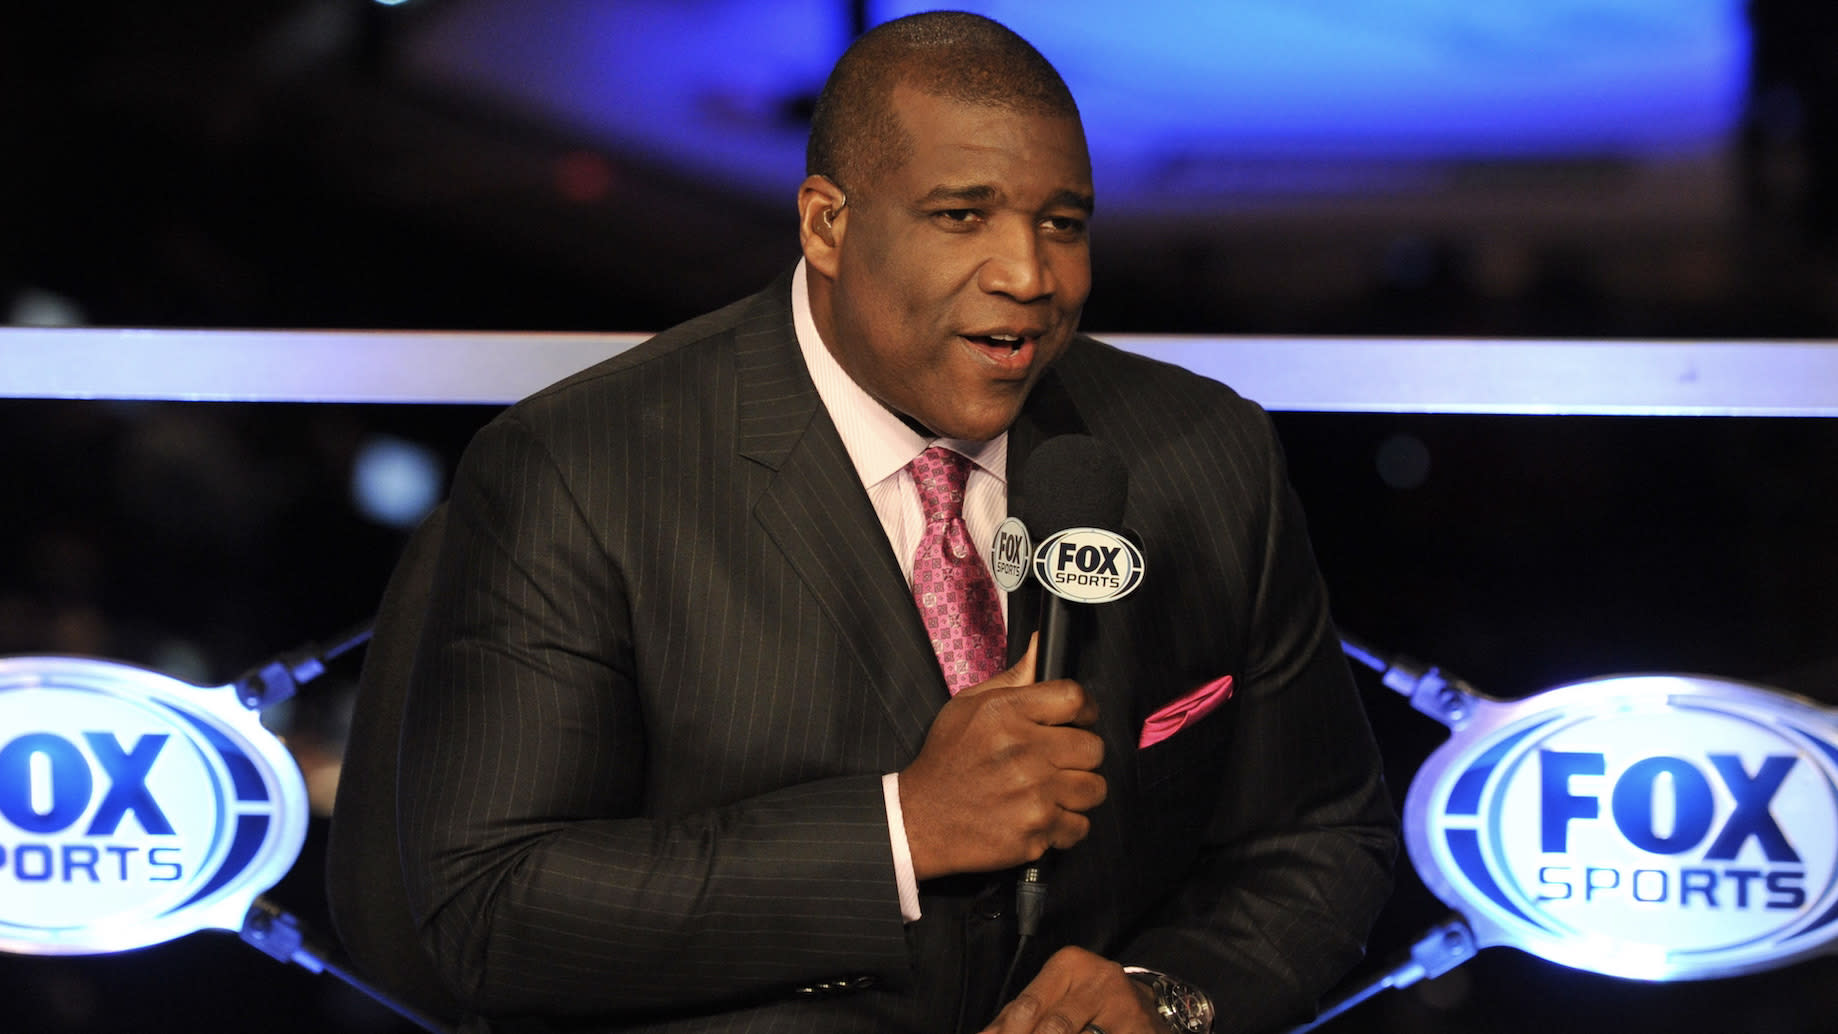 Strike up the bandleader How Curt Menefee keeps Foxs eclectic NFL pregame show rolling